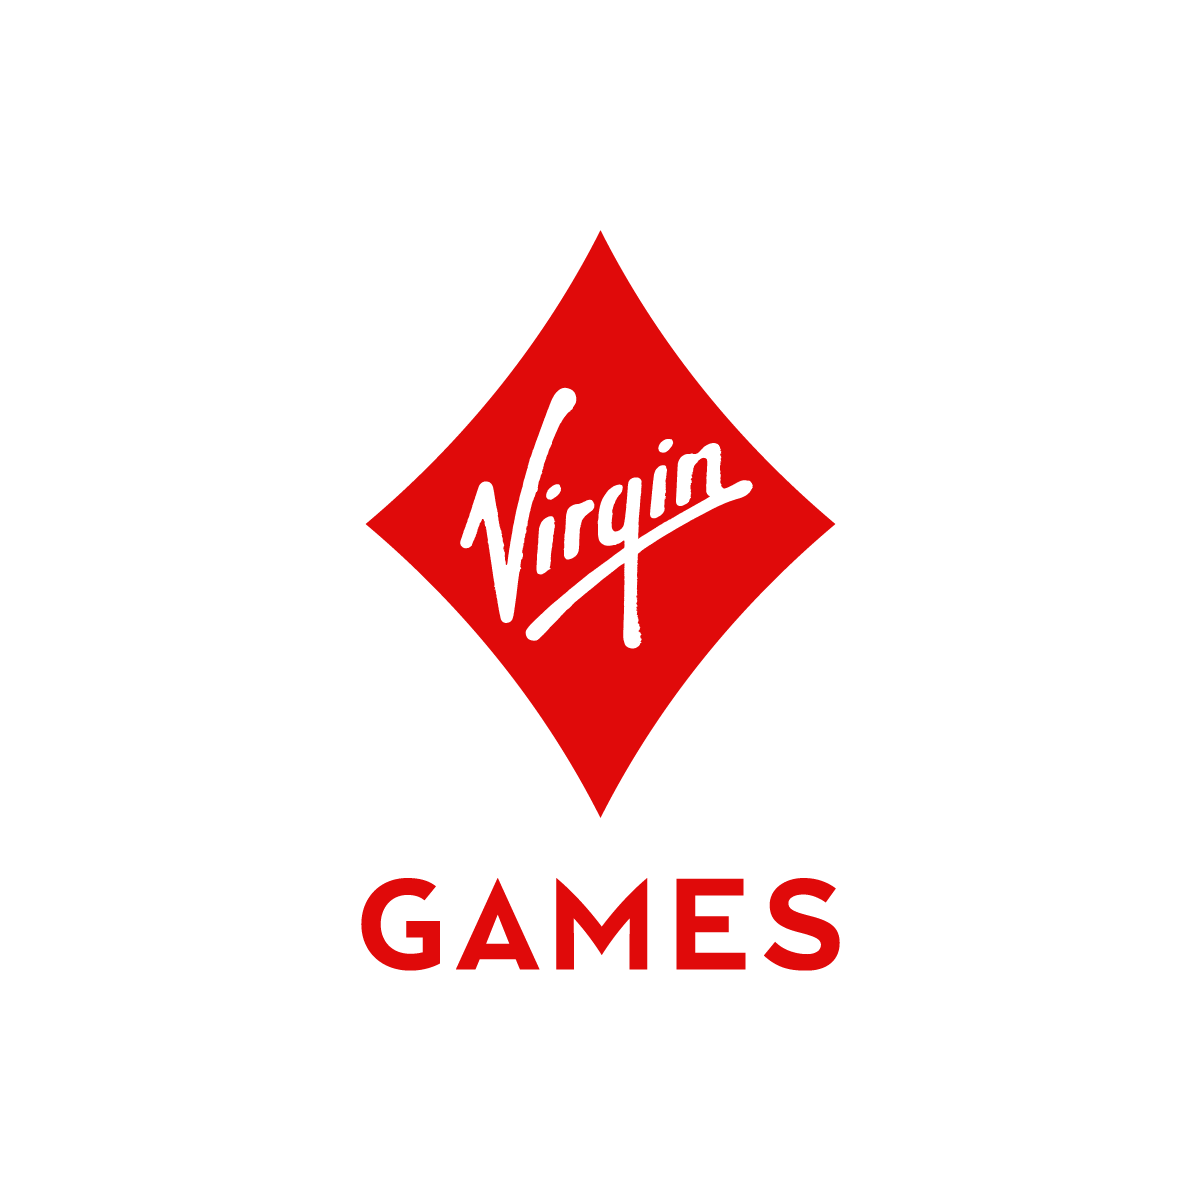 Virgin Games coupons and bonus codes for new customers